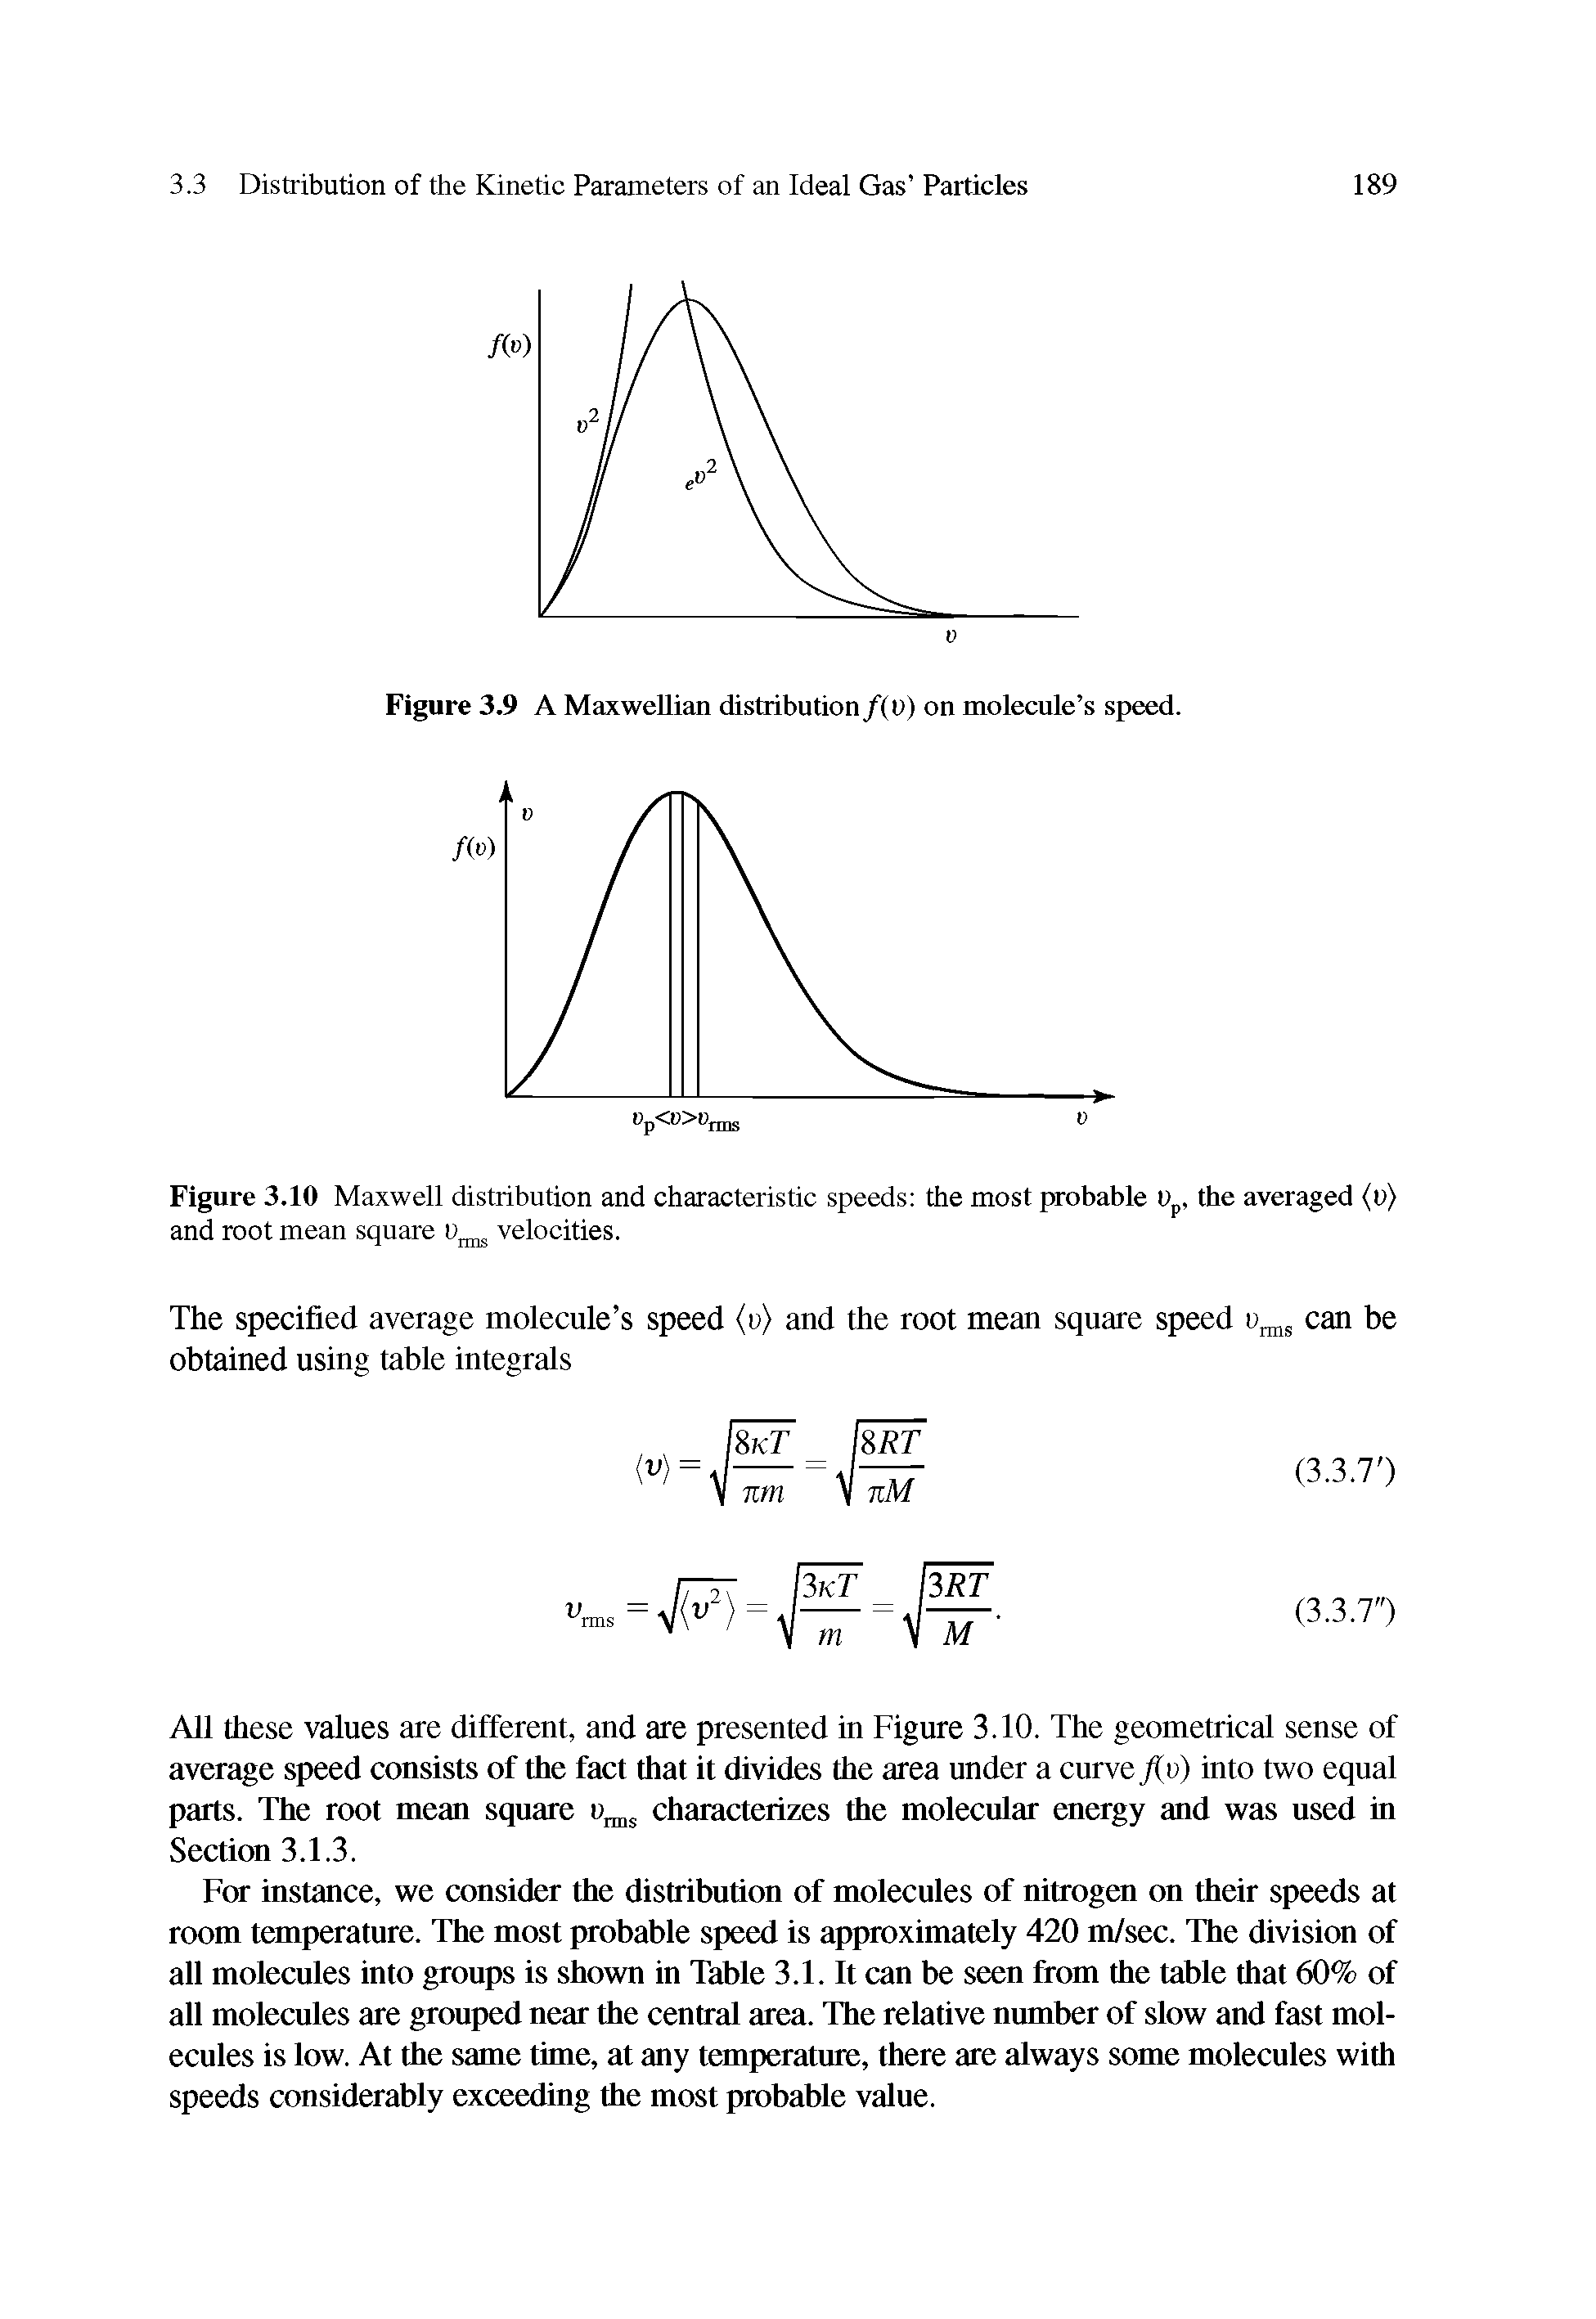 Figure 3.10 Maxwell distribution and characteristic speeds the most probable Dp, the averaged (n) and root mean square velocities.